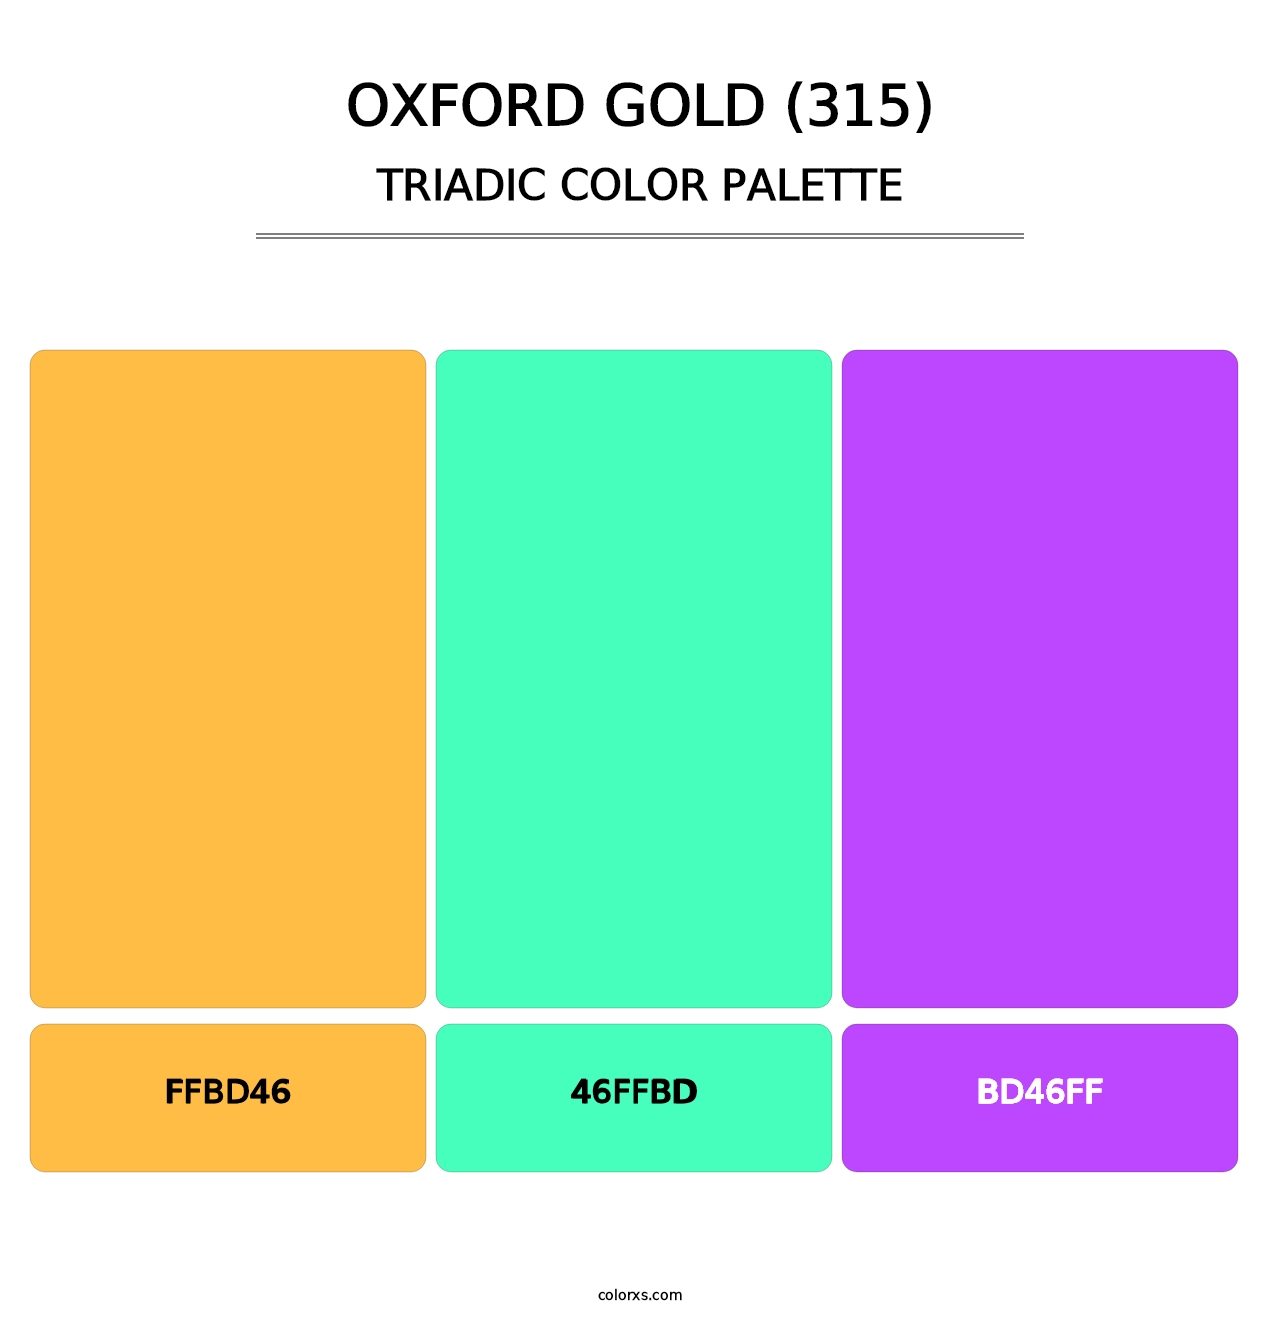 Oxford Gold (315) - Triadic Color Palette